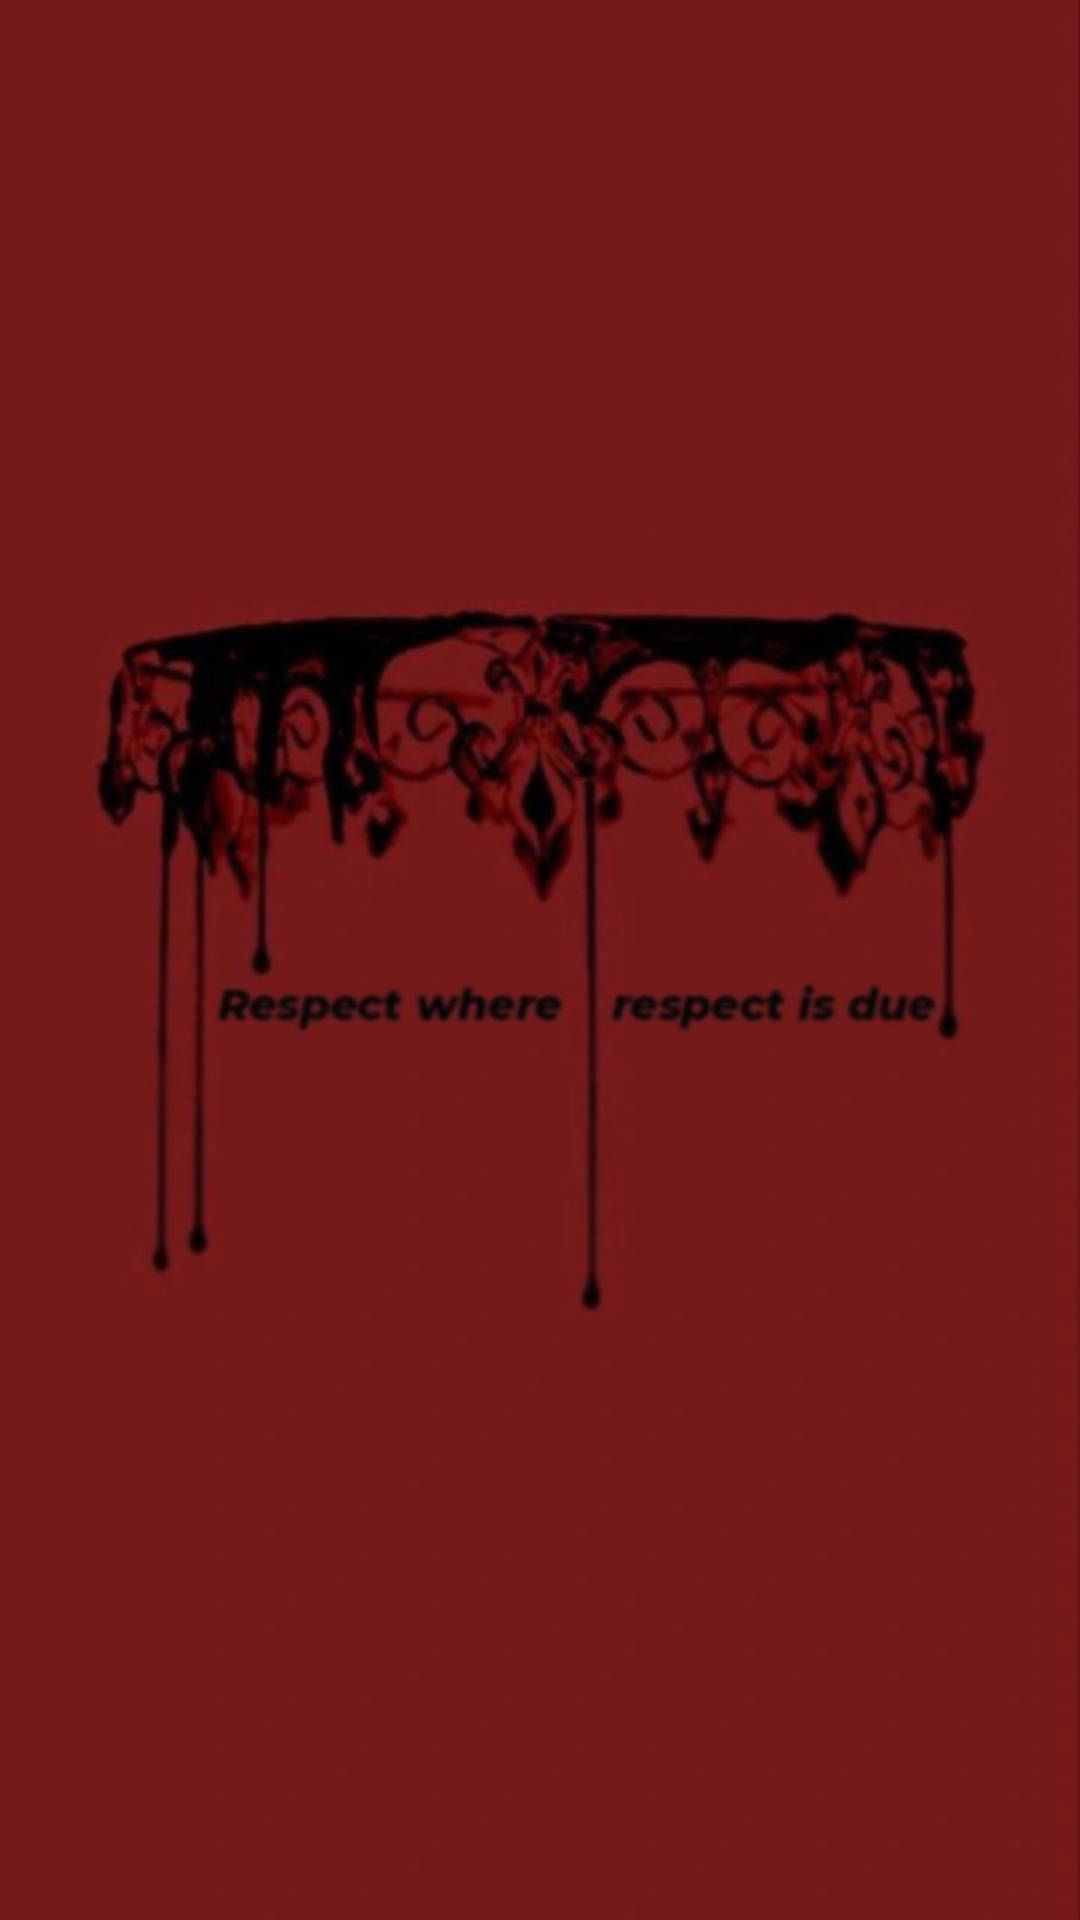 Respect where respect is due - Baddie